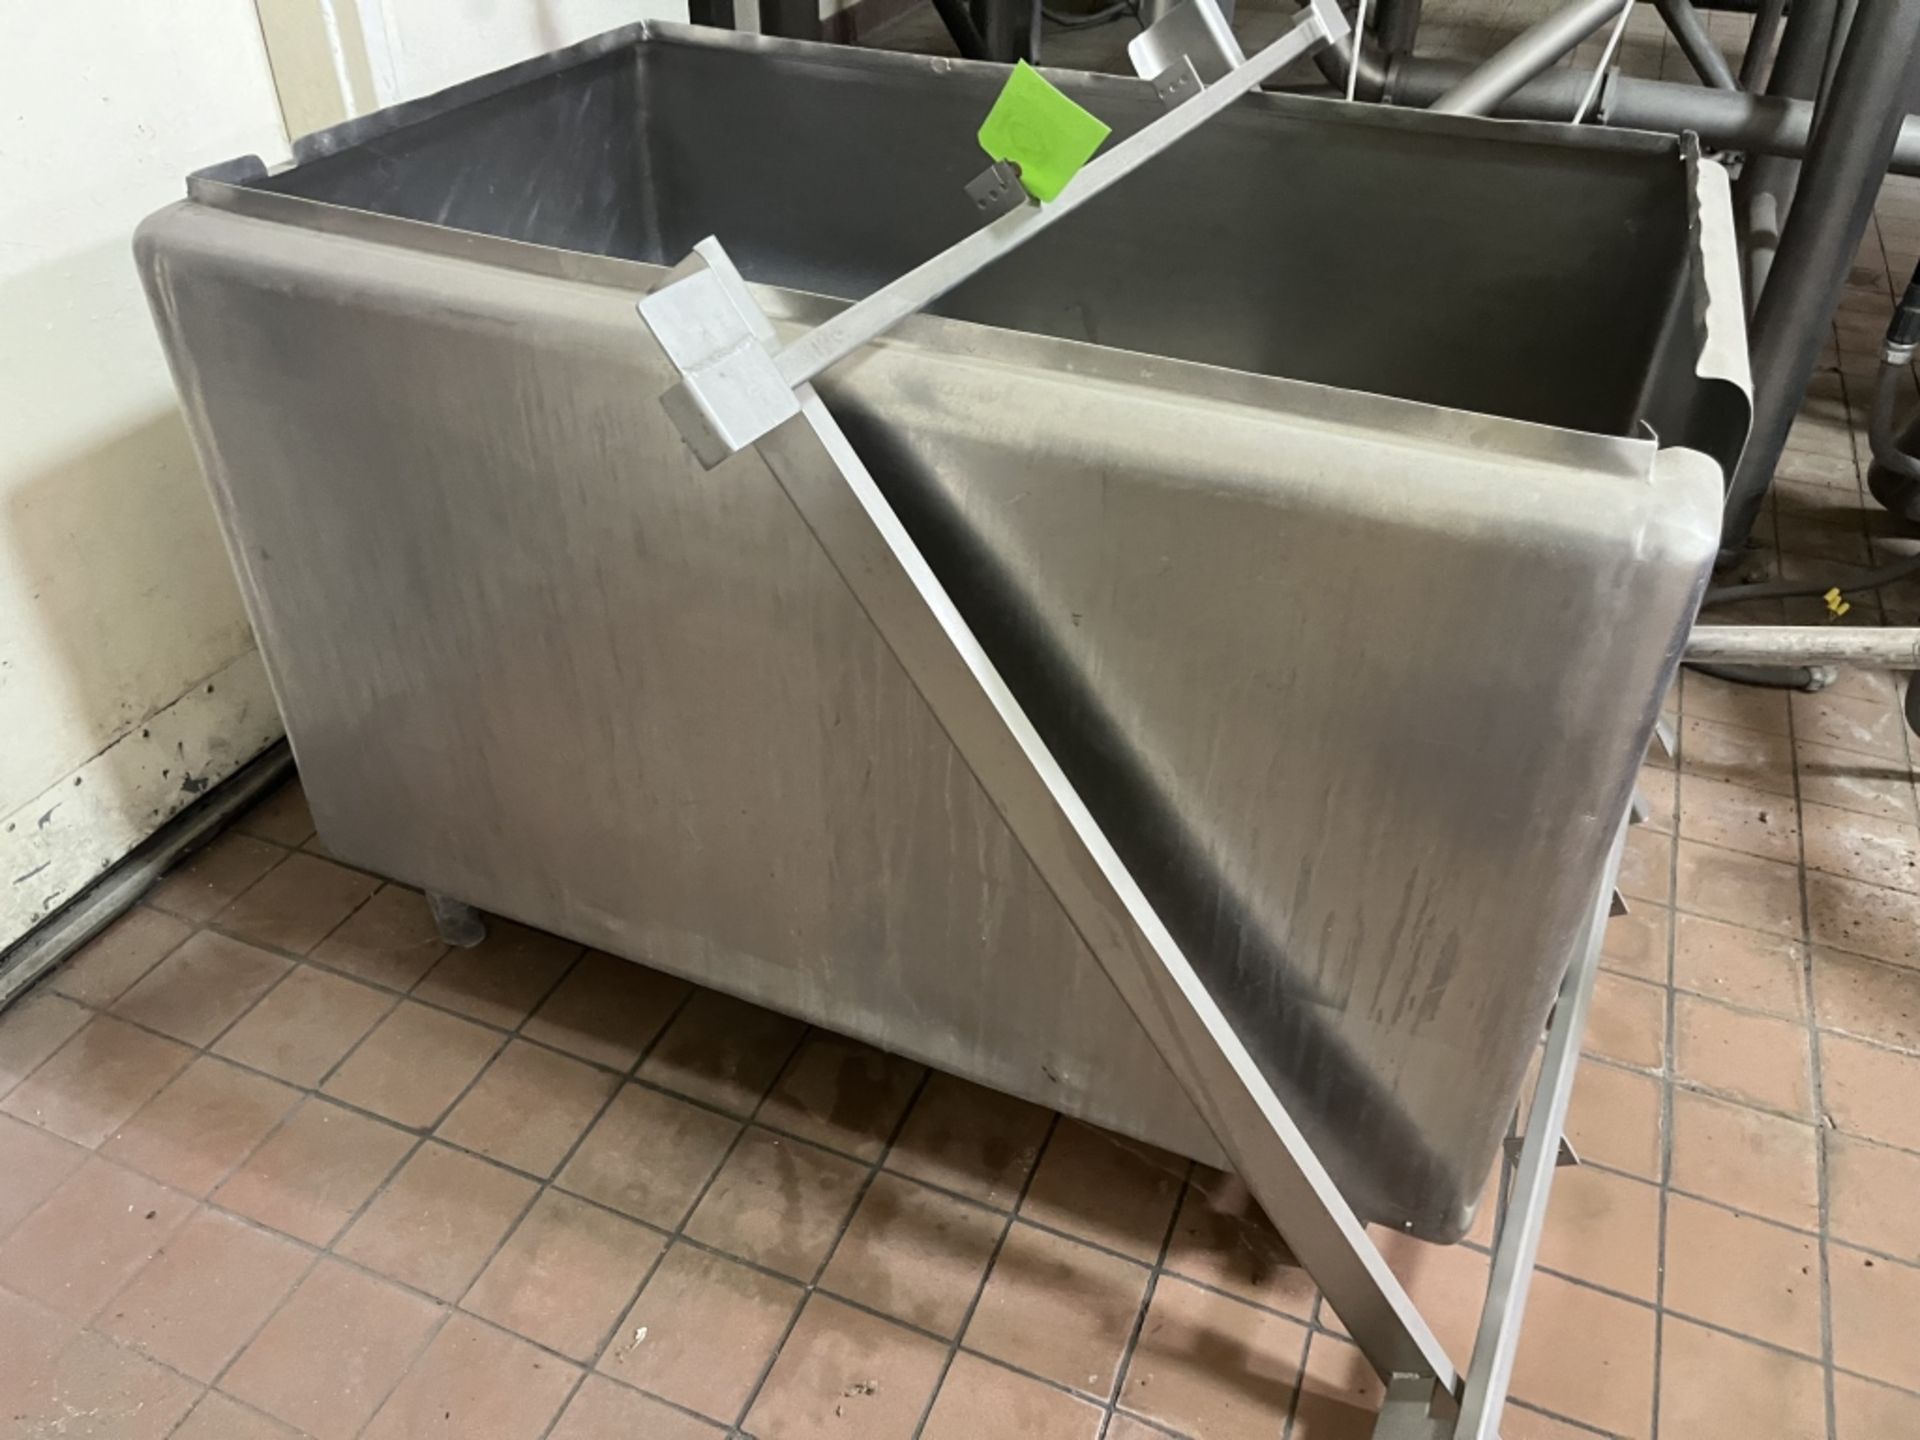 Ricotta Cheese Traugh, with Aprox. 37” WConveyor, with Single Wall S/S Traugh, Includes 10 hp PD - Image 20 of 20